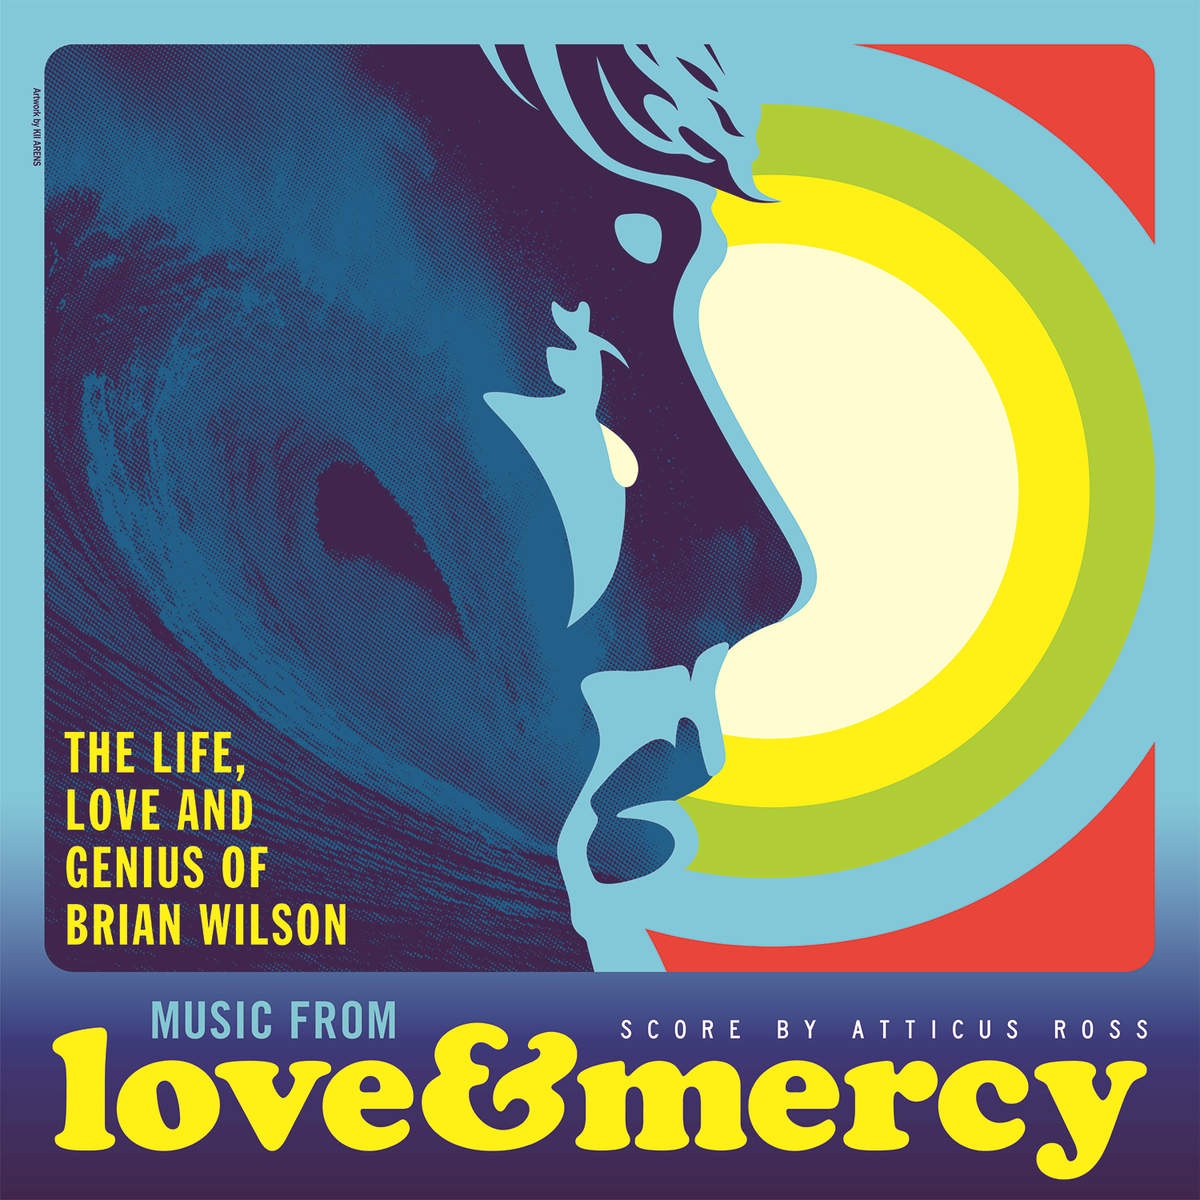 God Only Knows - From “Love & Mercy – The Life, Love And Genius Of Brian Wilson” Soundtrack